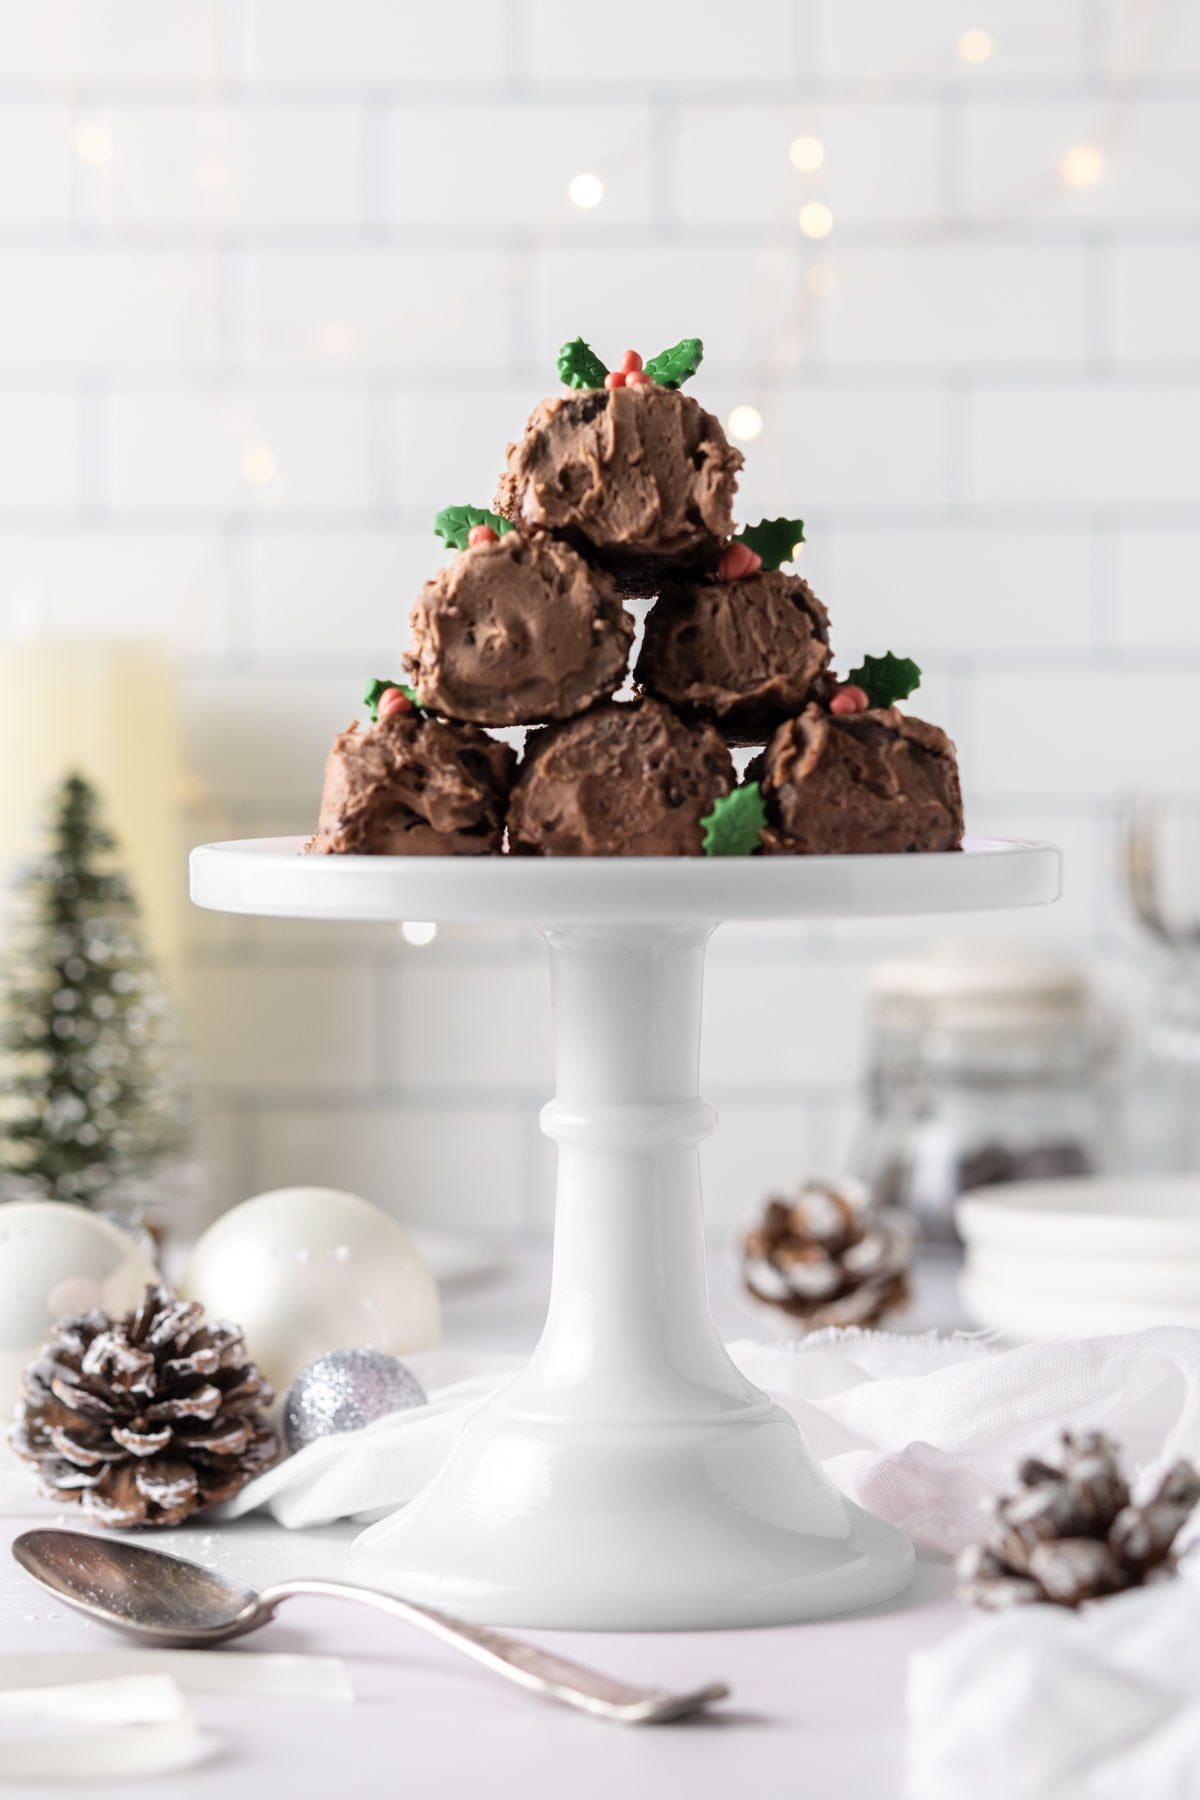 Stack of mini chocolate yule logs on a white cake stand